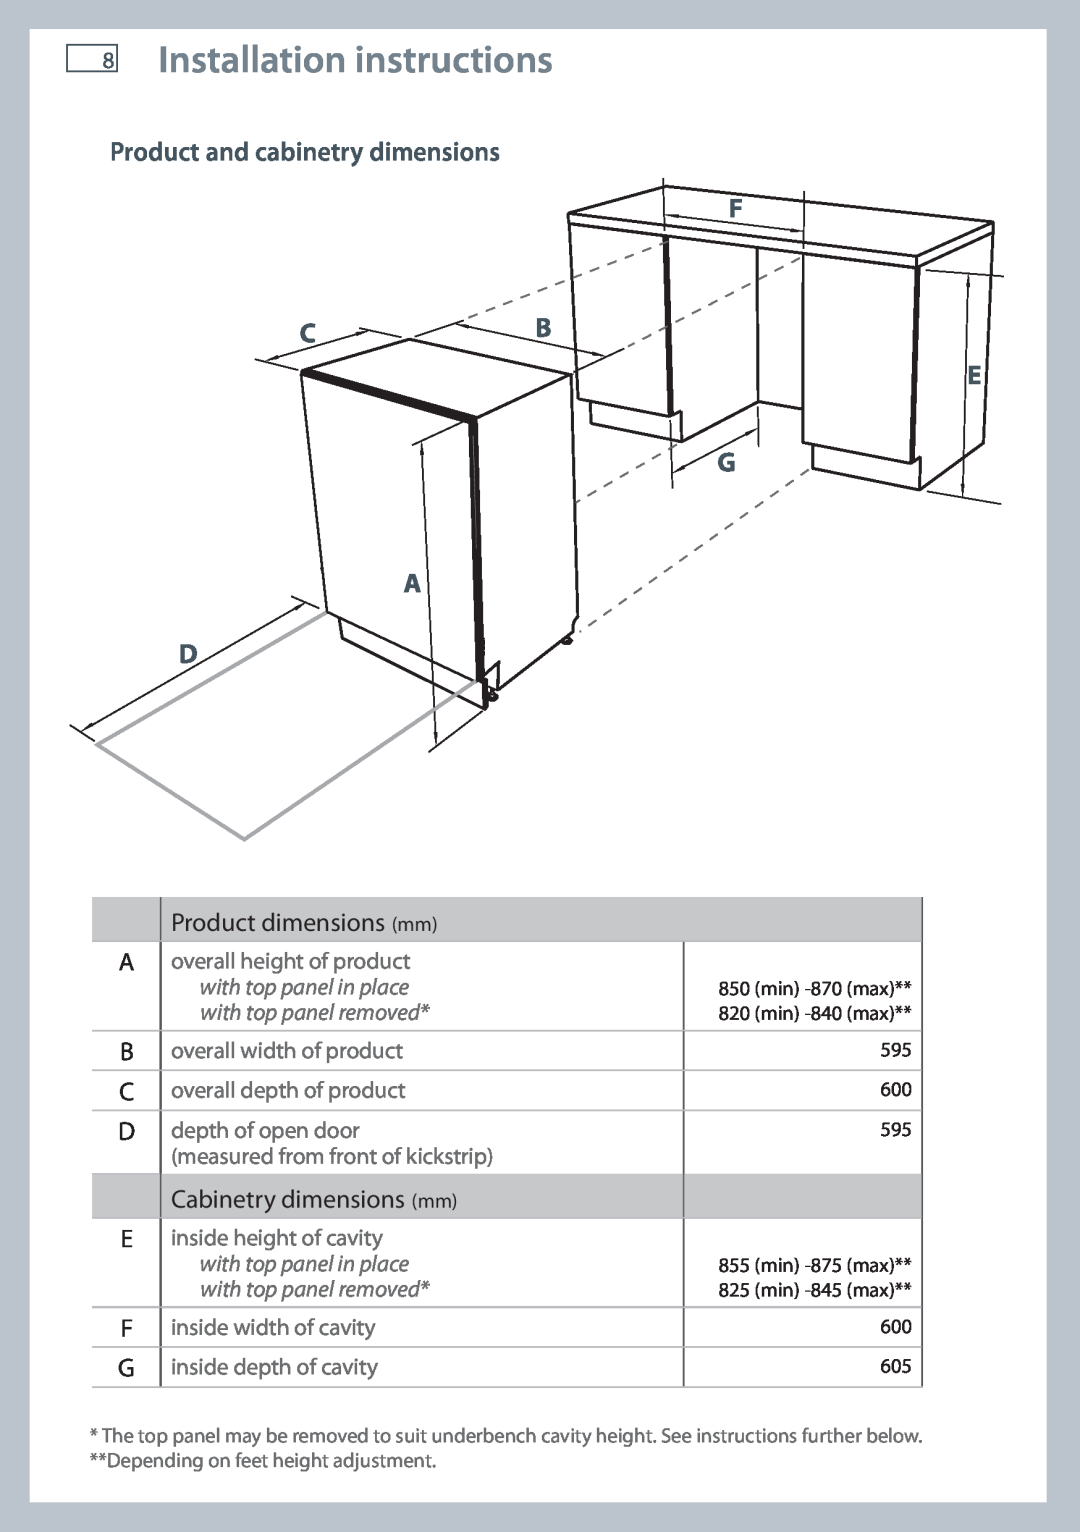 Fisher & Paykel DW60CC Installation instructions, Product and cabinetry dimensions F C B E G A D, Product dimensions mm 